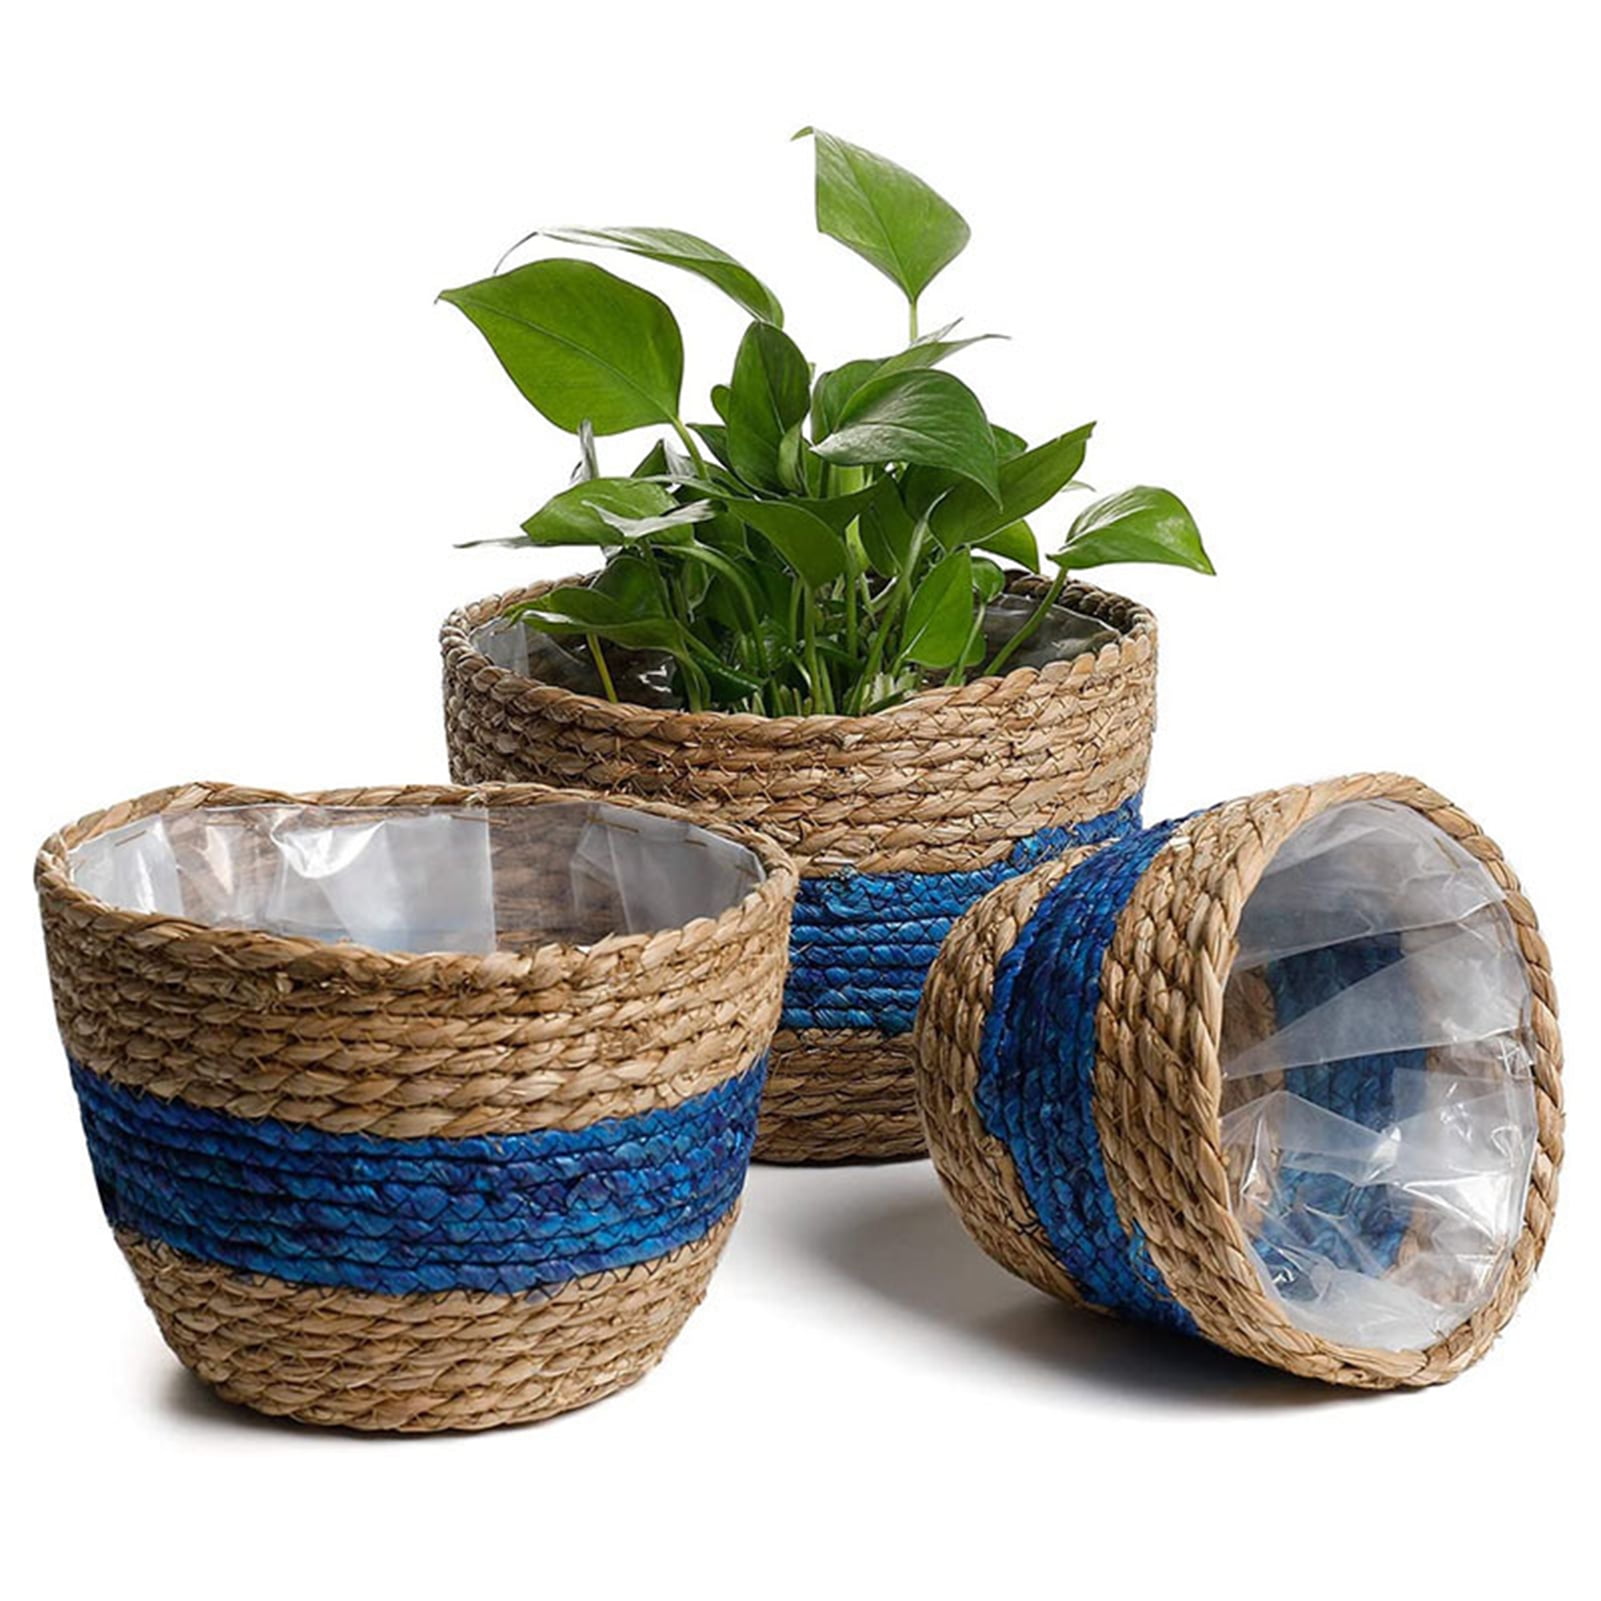 Details about   Vintage Container Flower Vase Bamboo Plant Pots Hanging Planters For Home Decors 